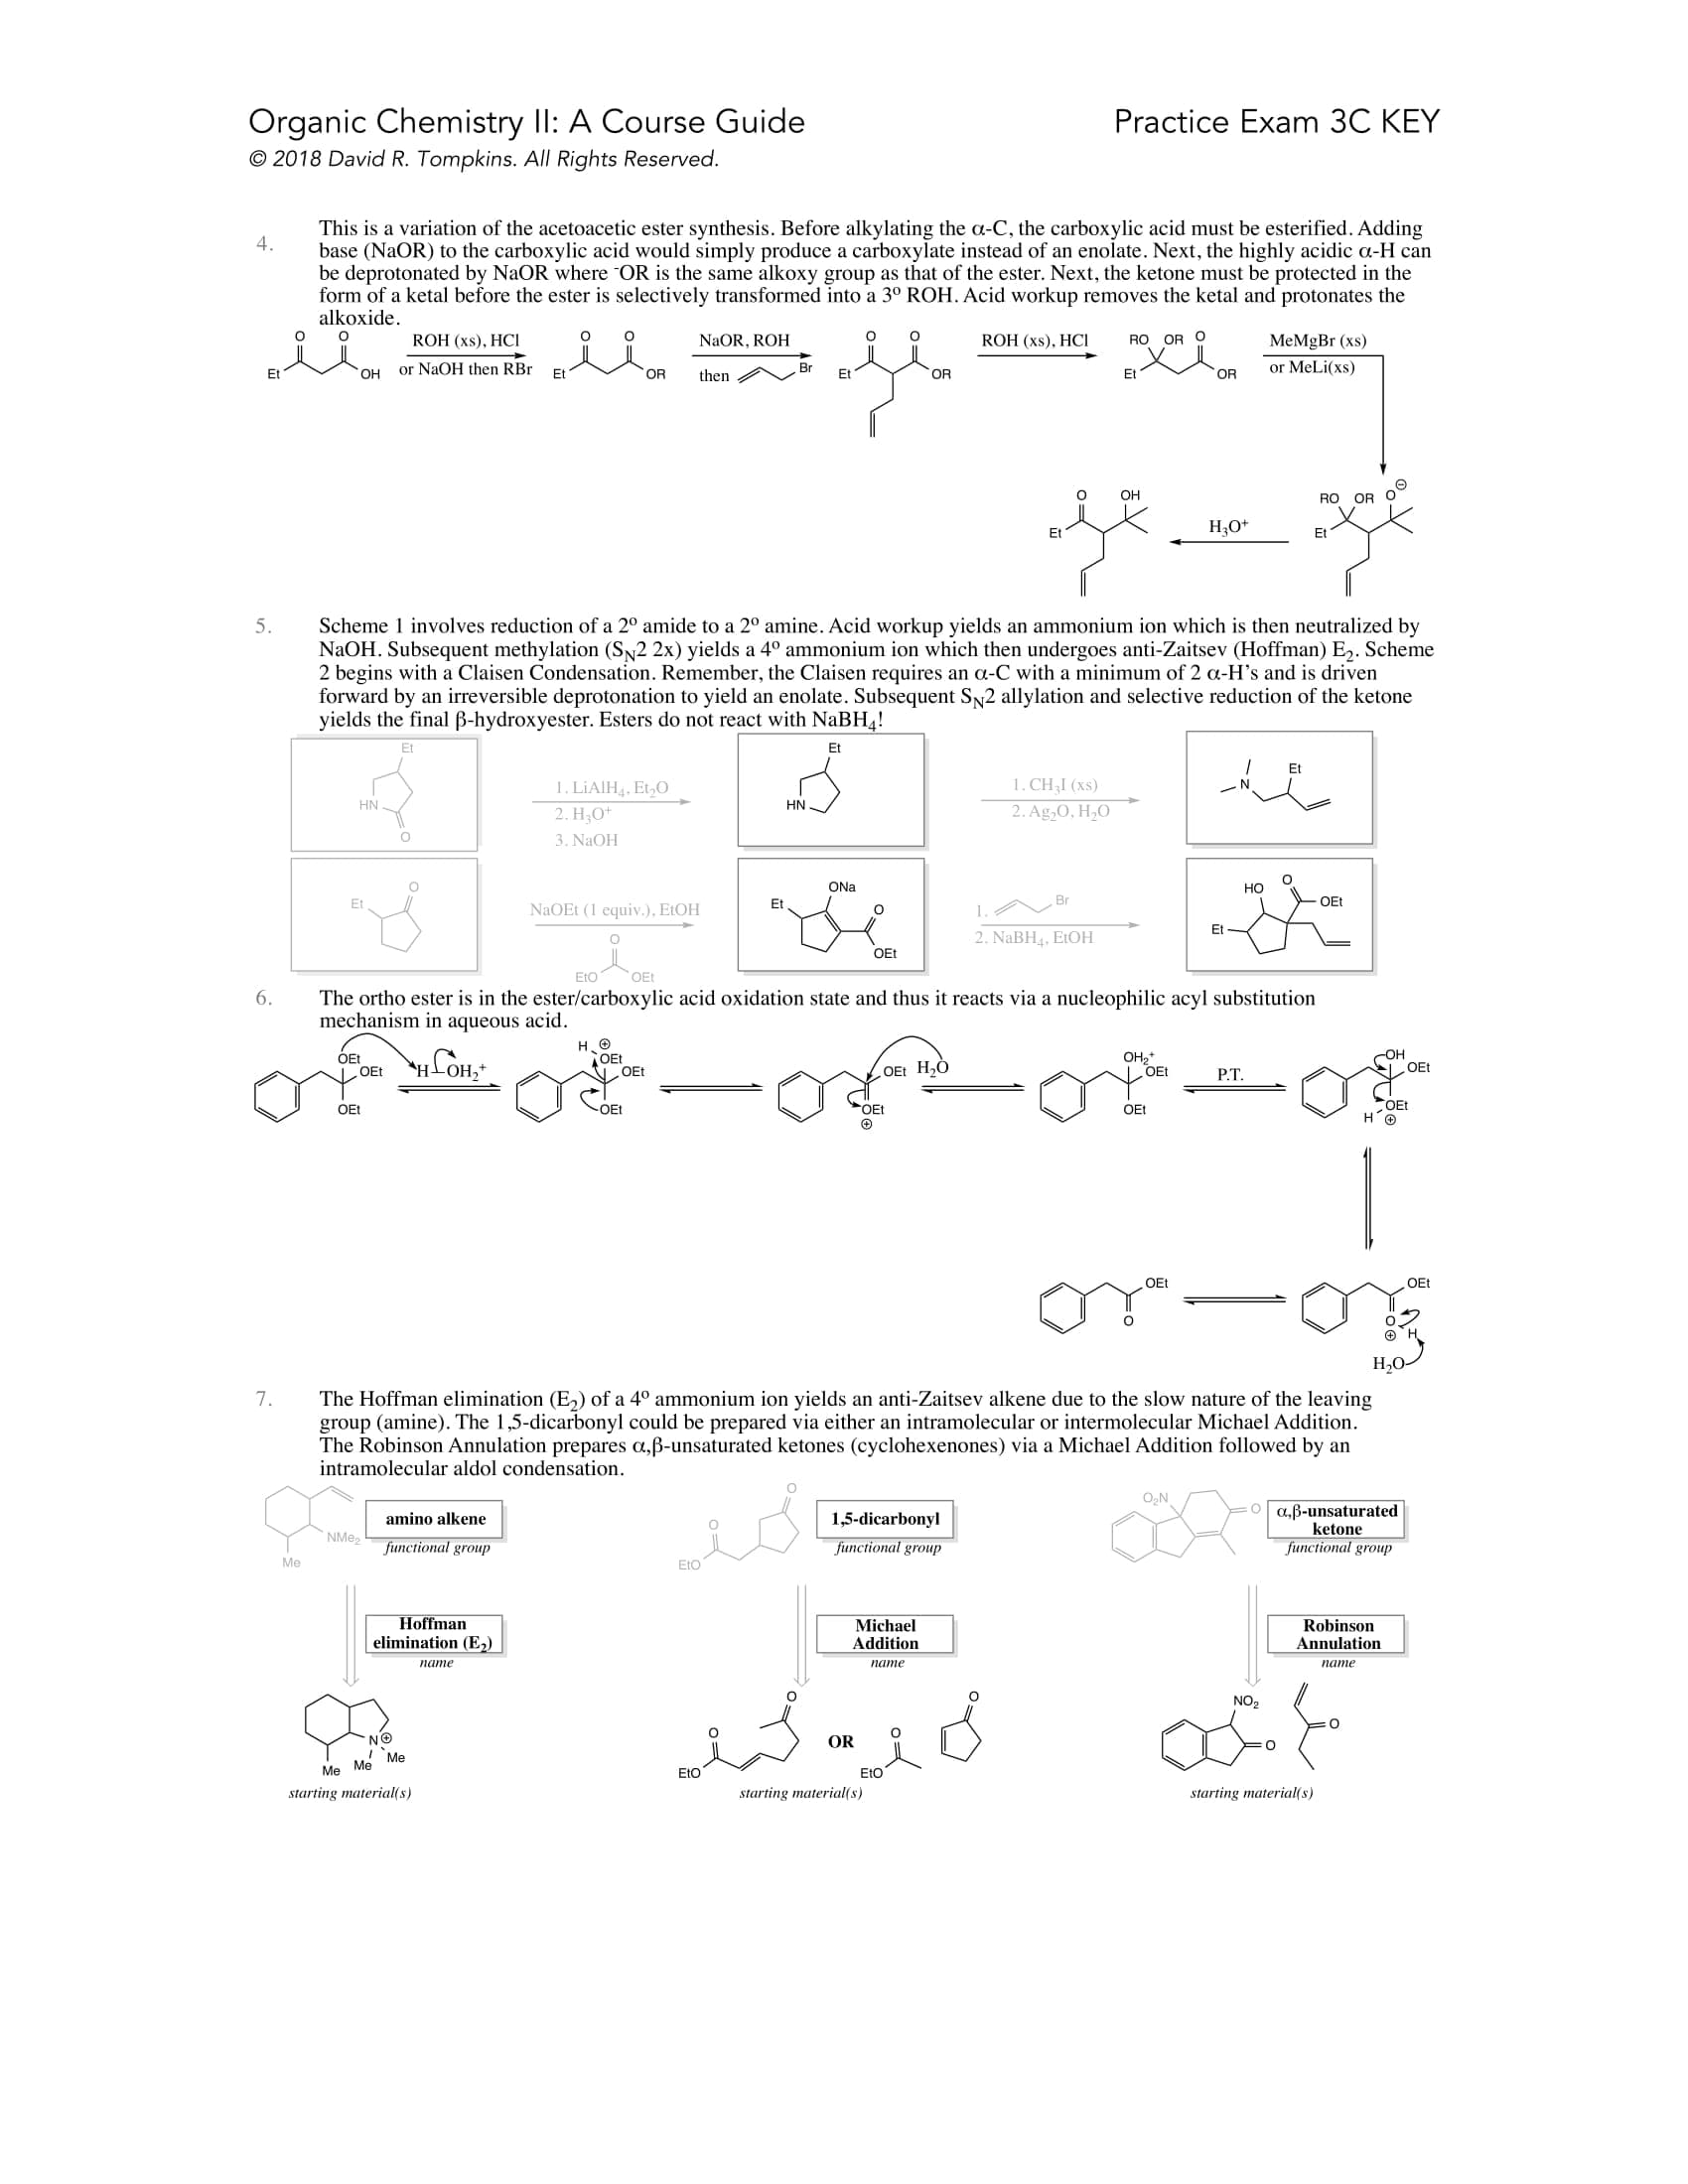 Introduction to Organic II Chemistry (Duke) Course Guide Example Page 6